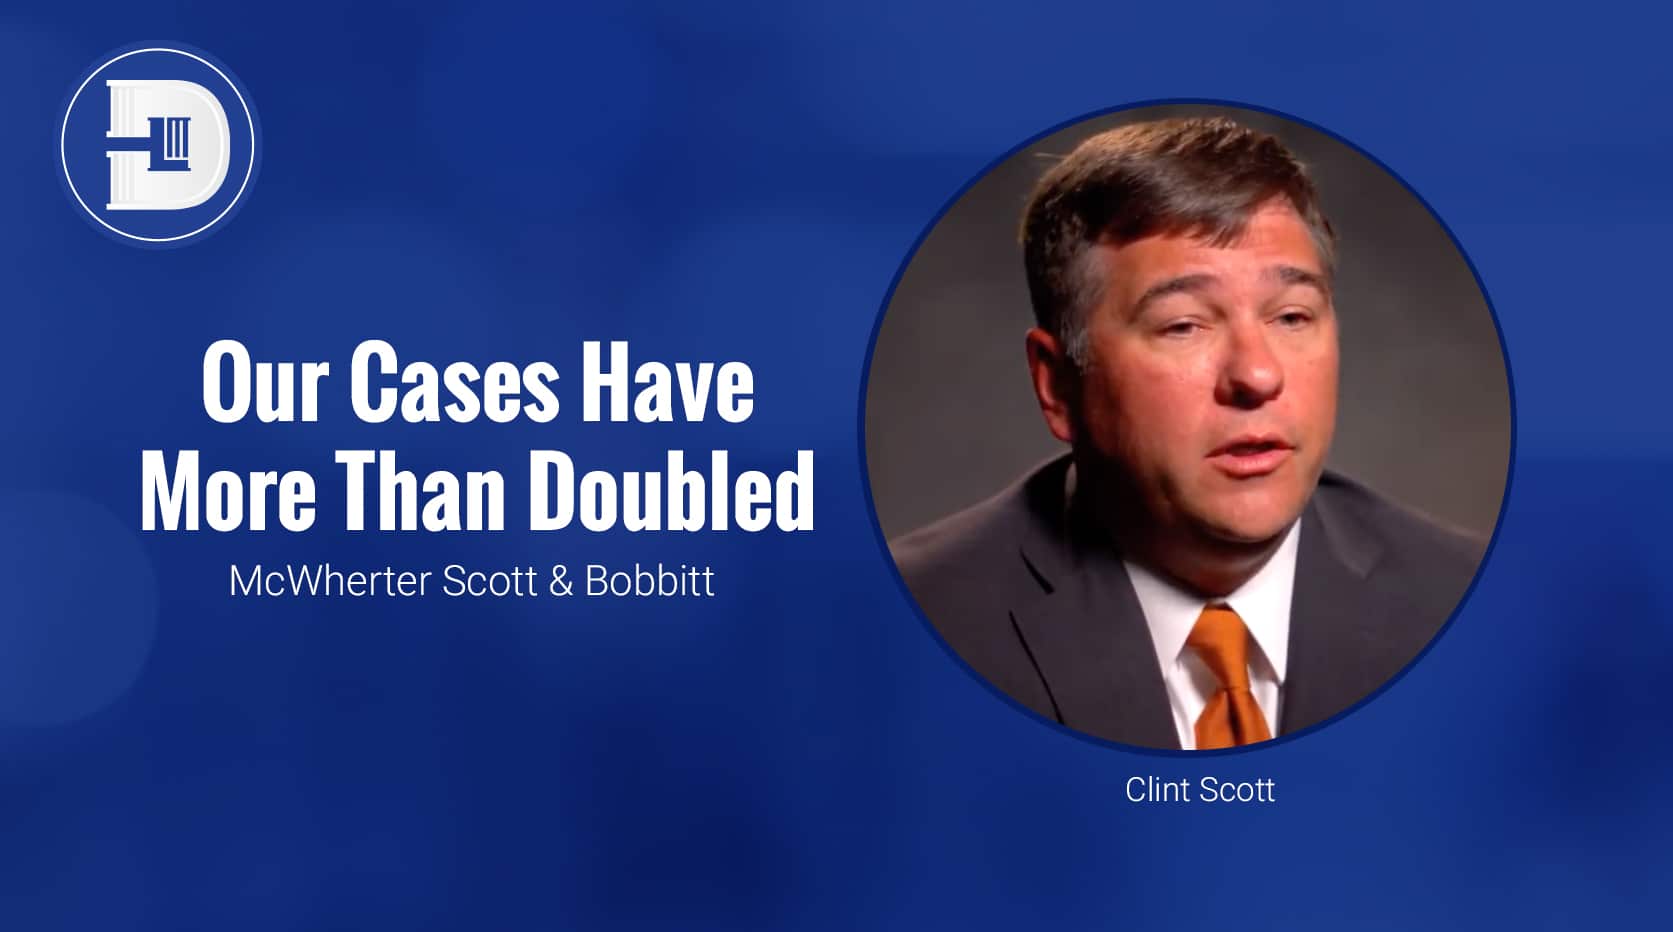 Our Cases Have More Than Doubled - Clint Scott